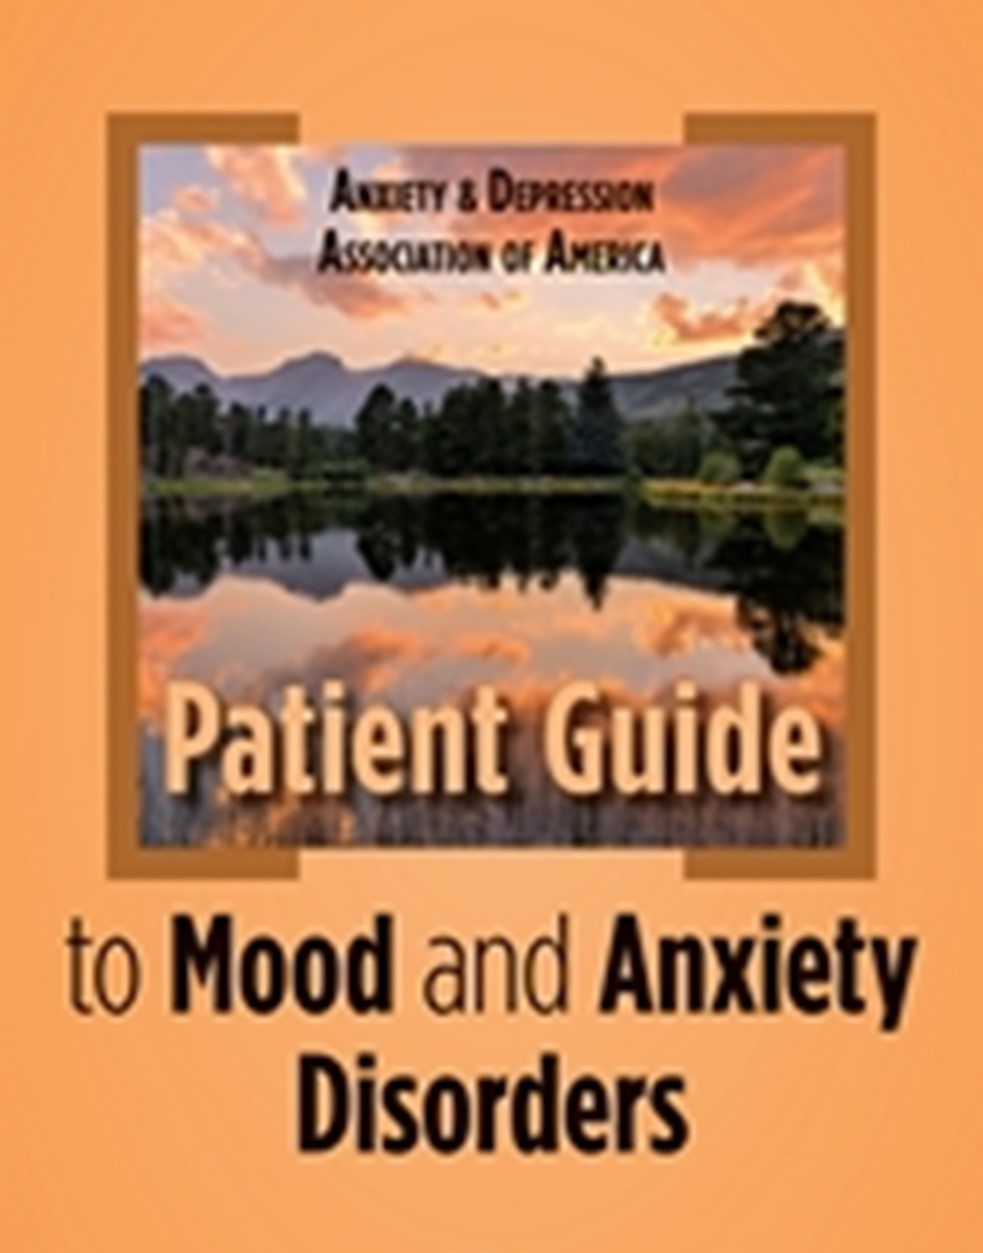 Anxiety and Depression Association of America; Patients Gudie to mood and anxiety disorders